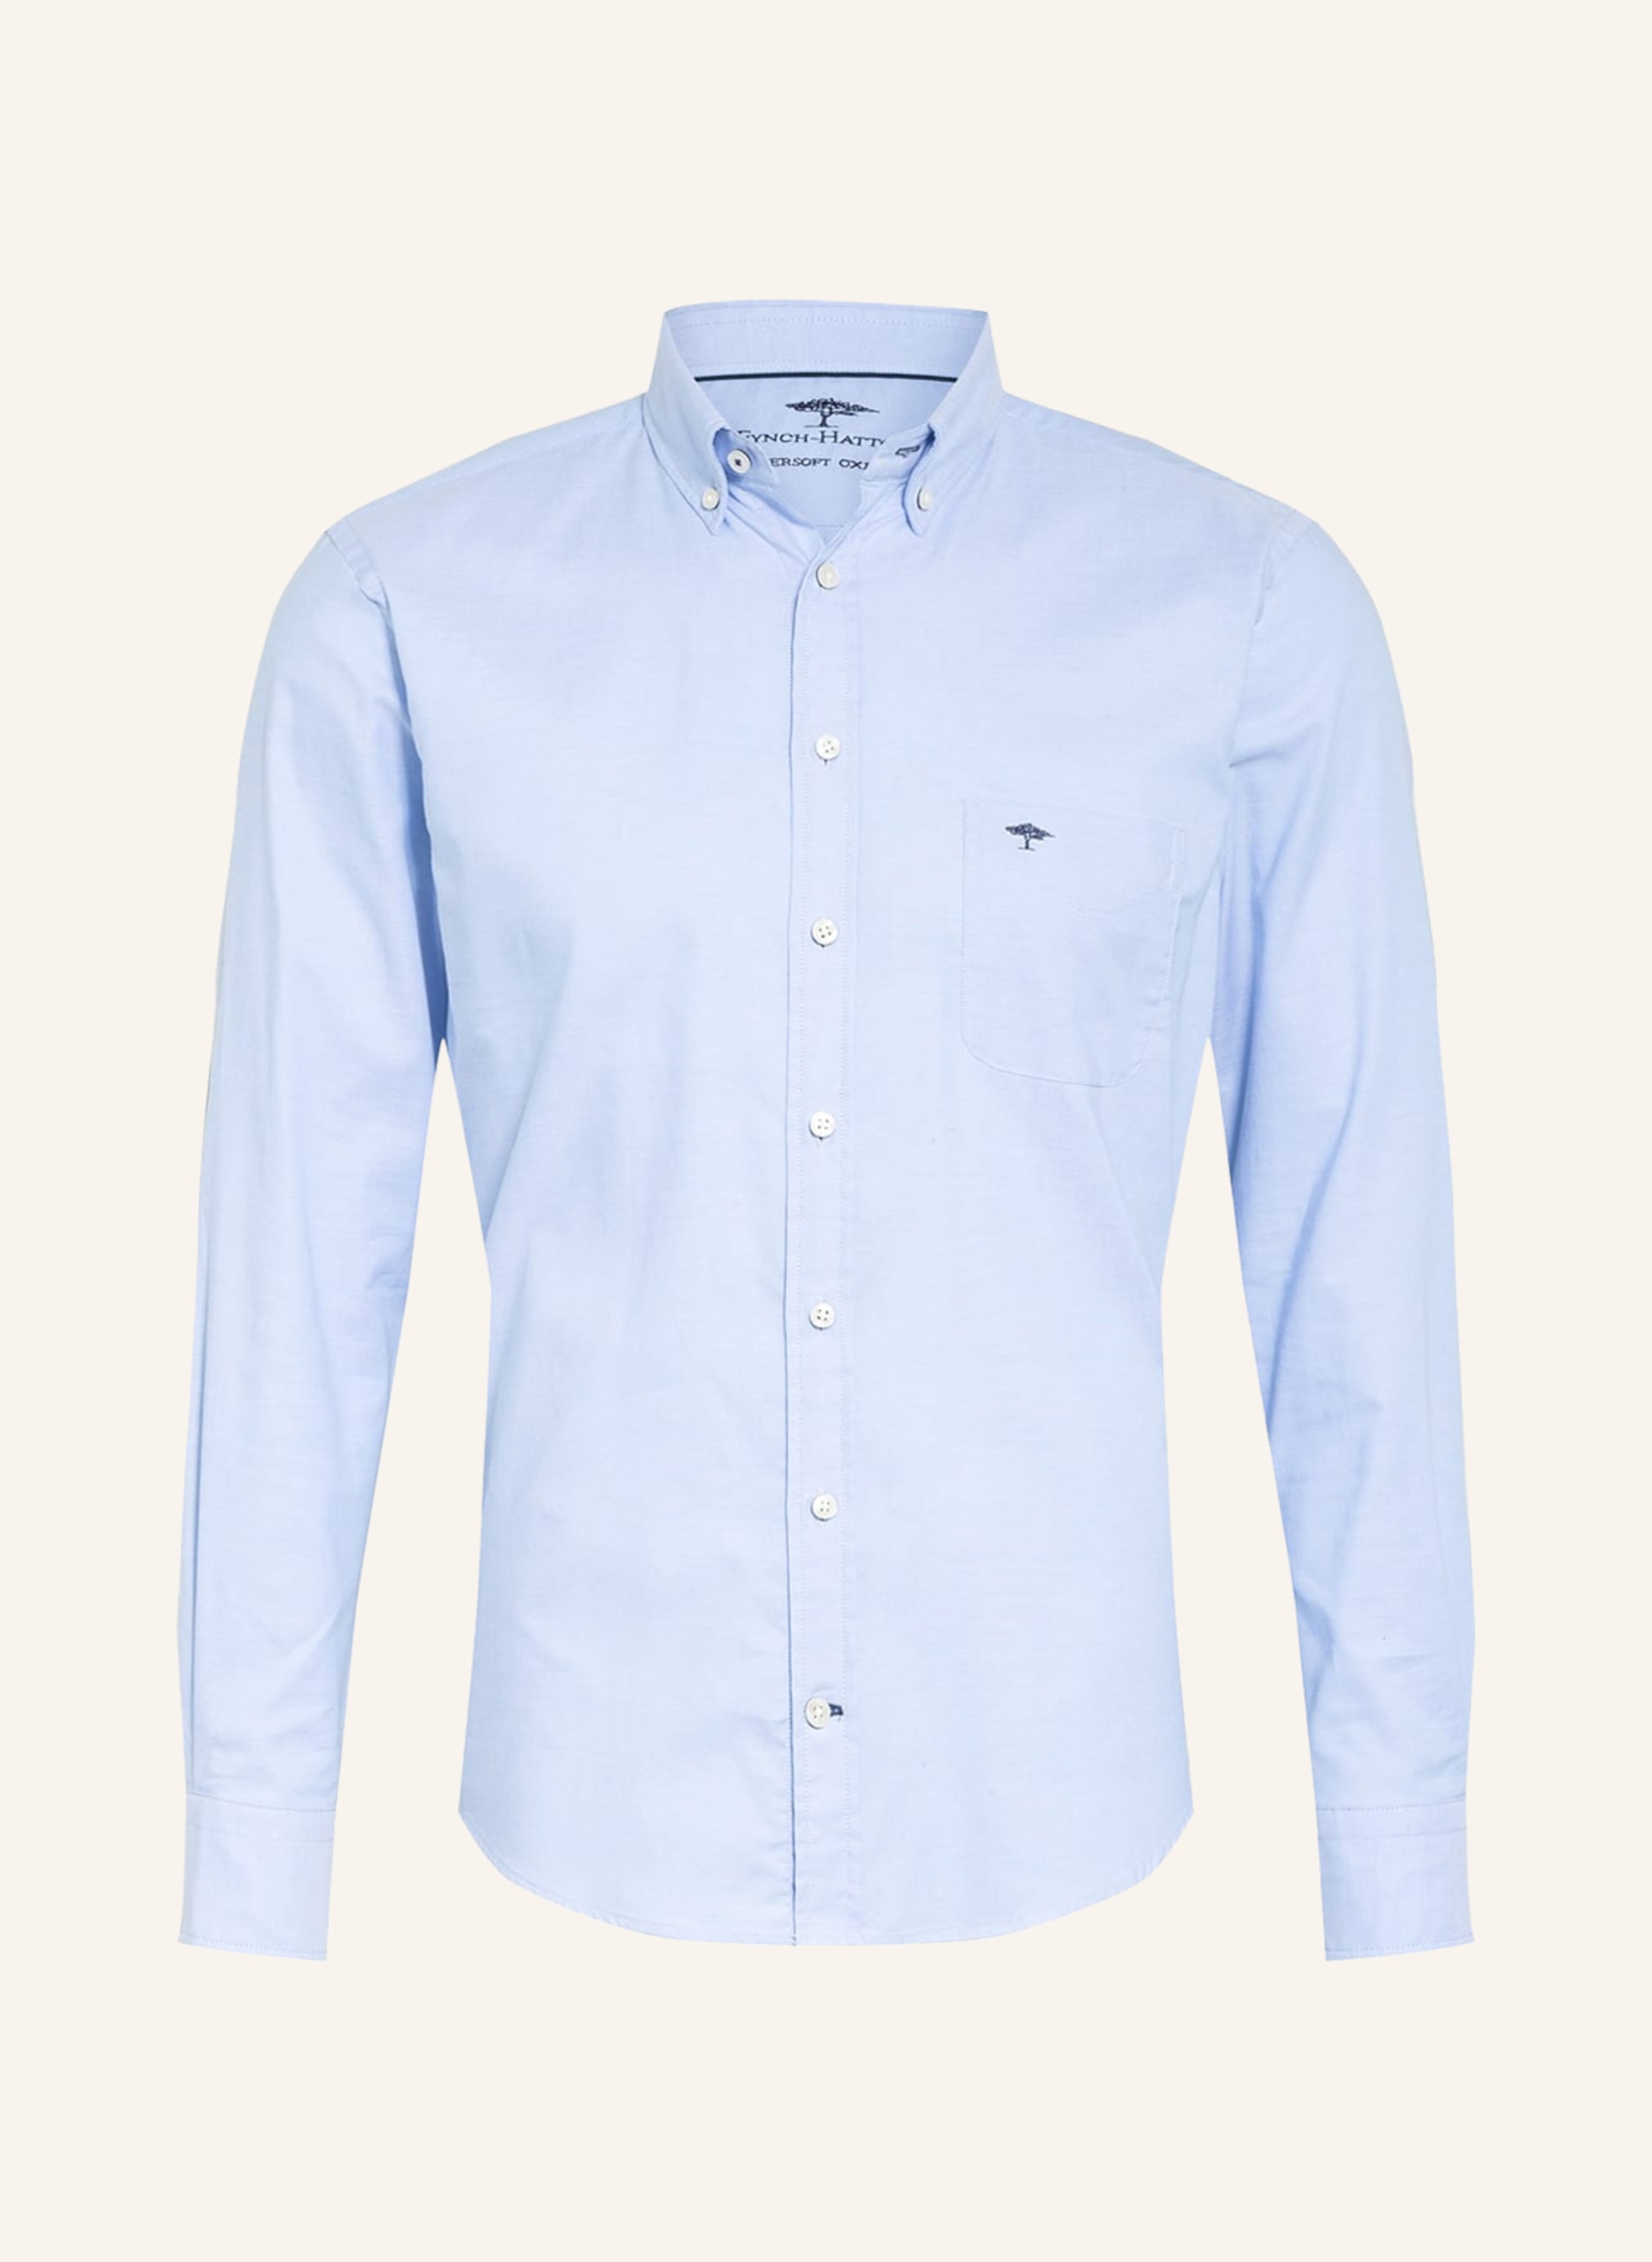 FYNCH-HATTON Shirt casual fit in light blue